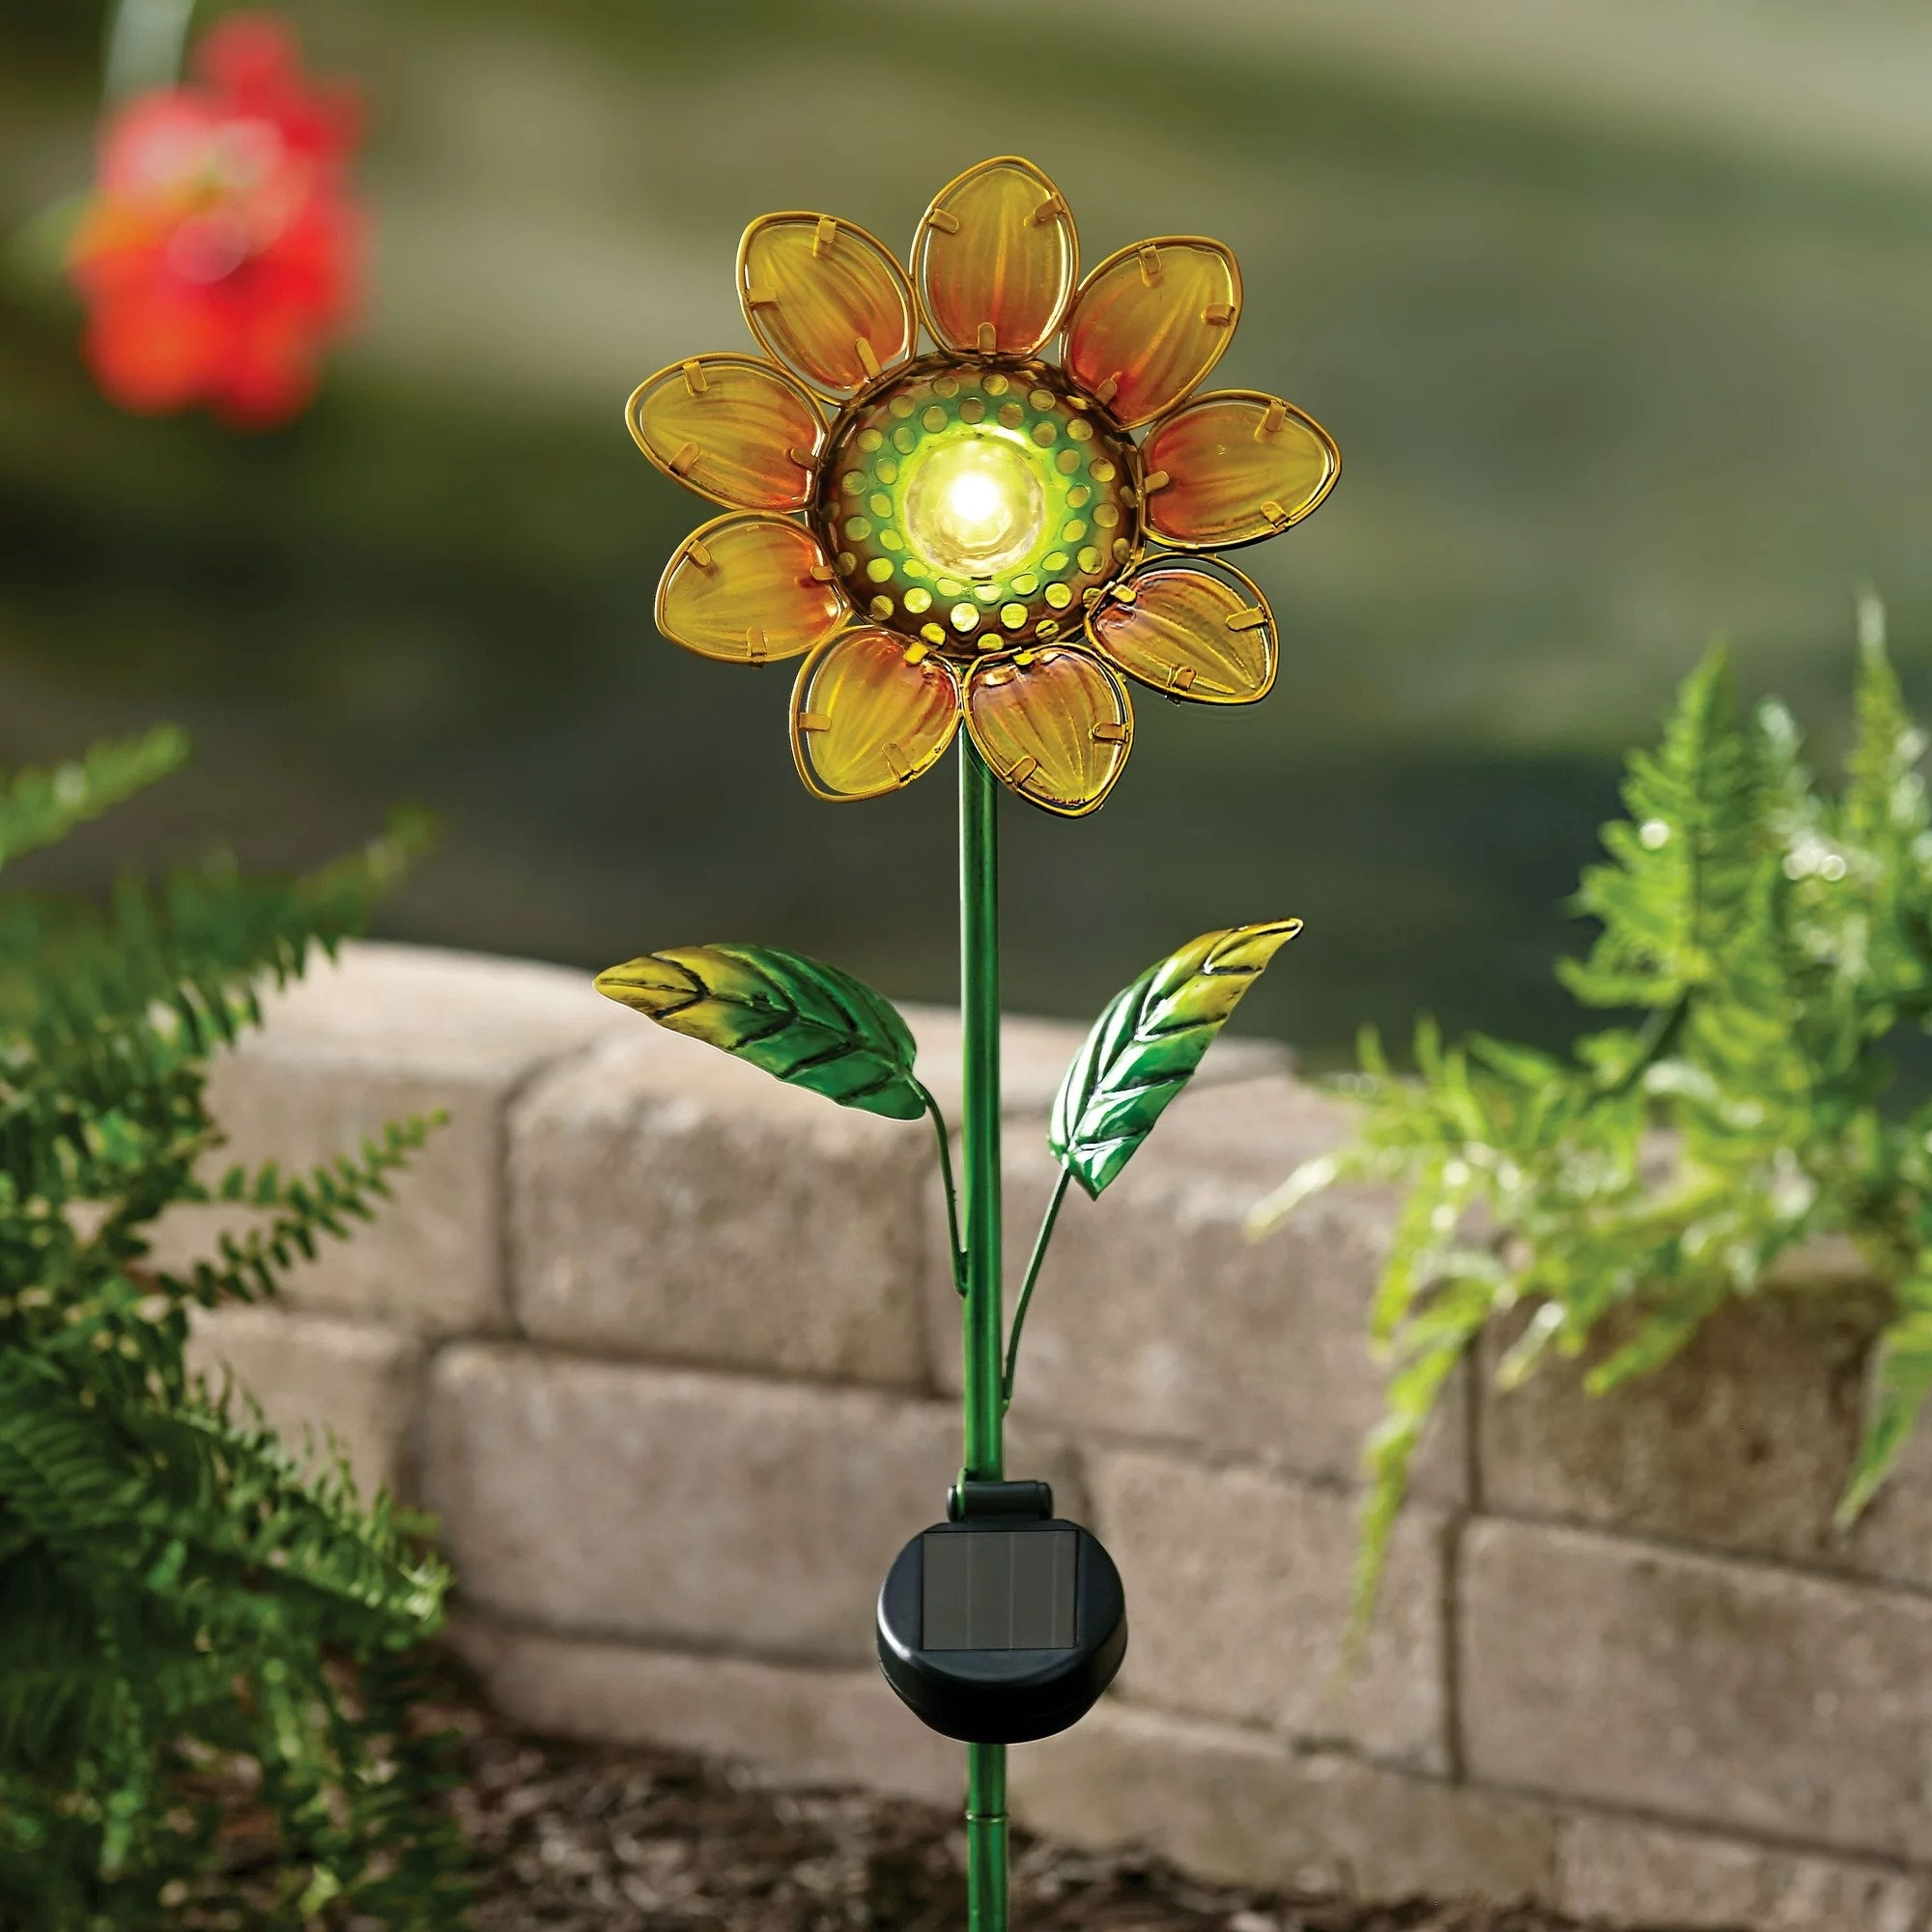 The garden stake with a mini solar panel attached at the stem